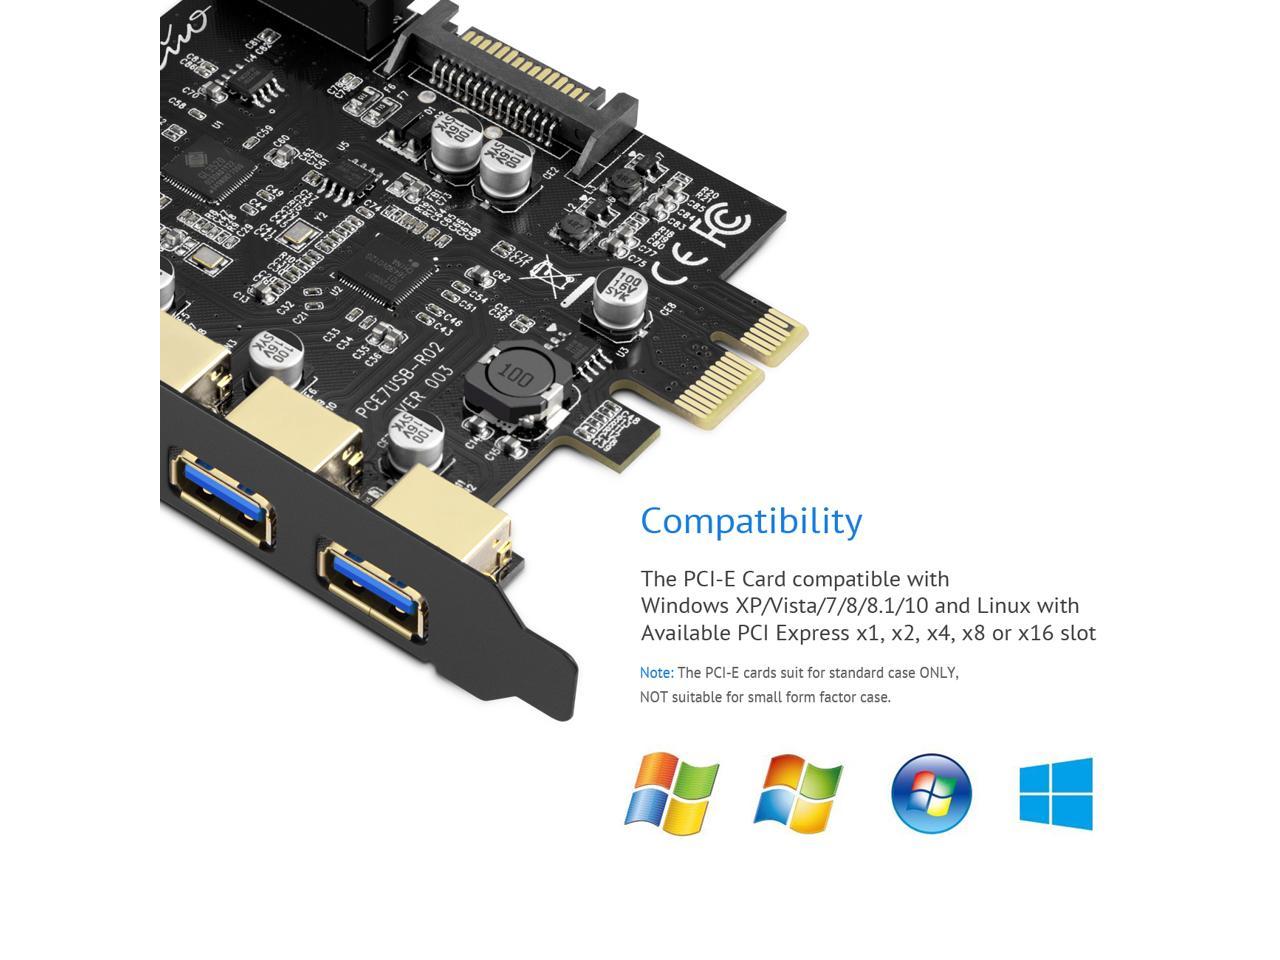 Expand Another Two USB 3.0 Ports Rivo PCI Express Riser USB 3.0 Card to A+Type-C 4-port PCI Extender Card and 4 Pin Power Connector,PCI-E USB 3.0 Hub Controller Adapter with Interna 19 Pin Connector